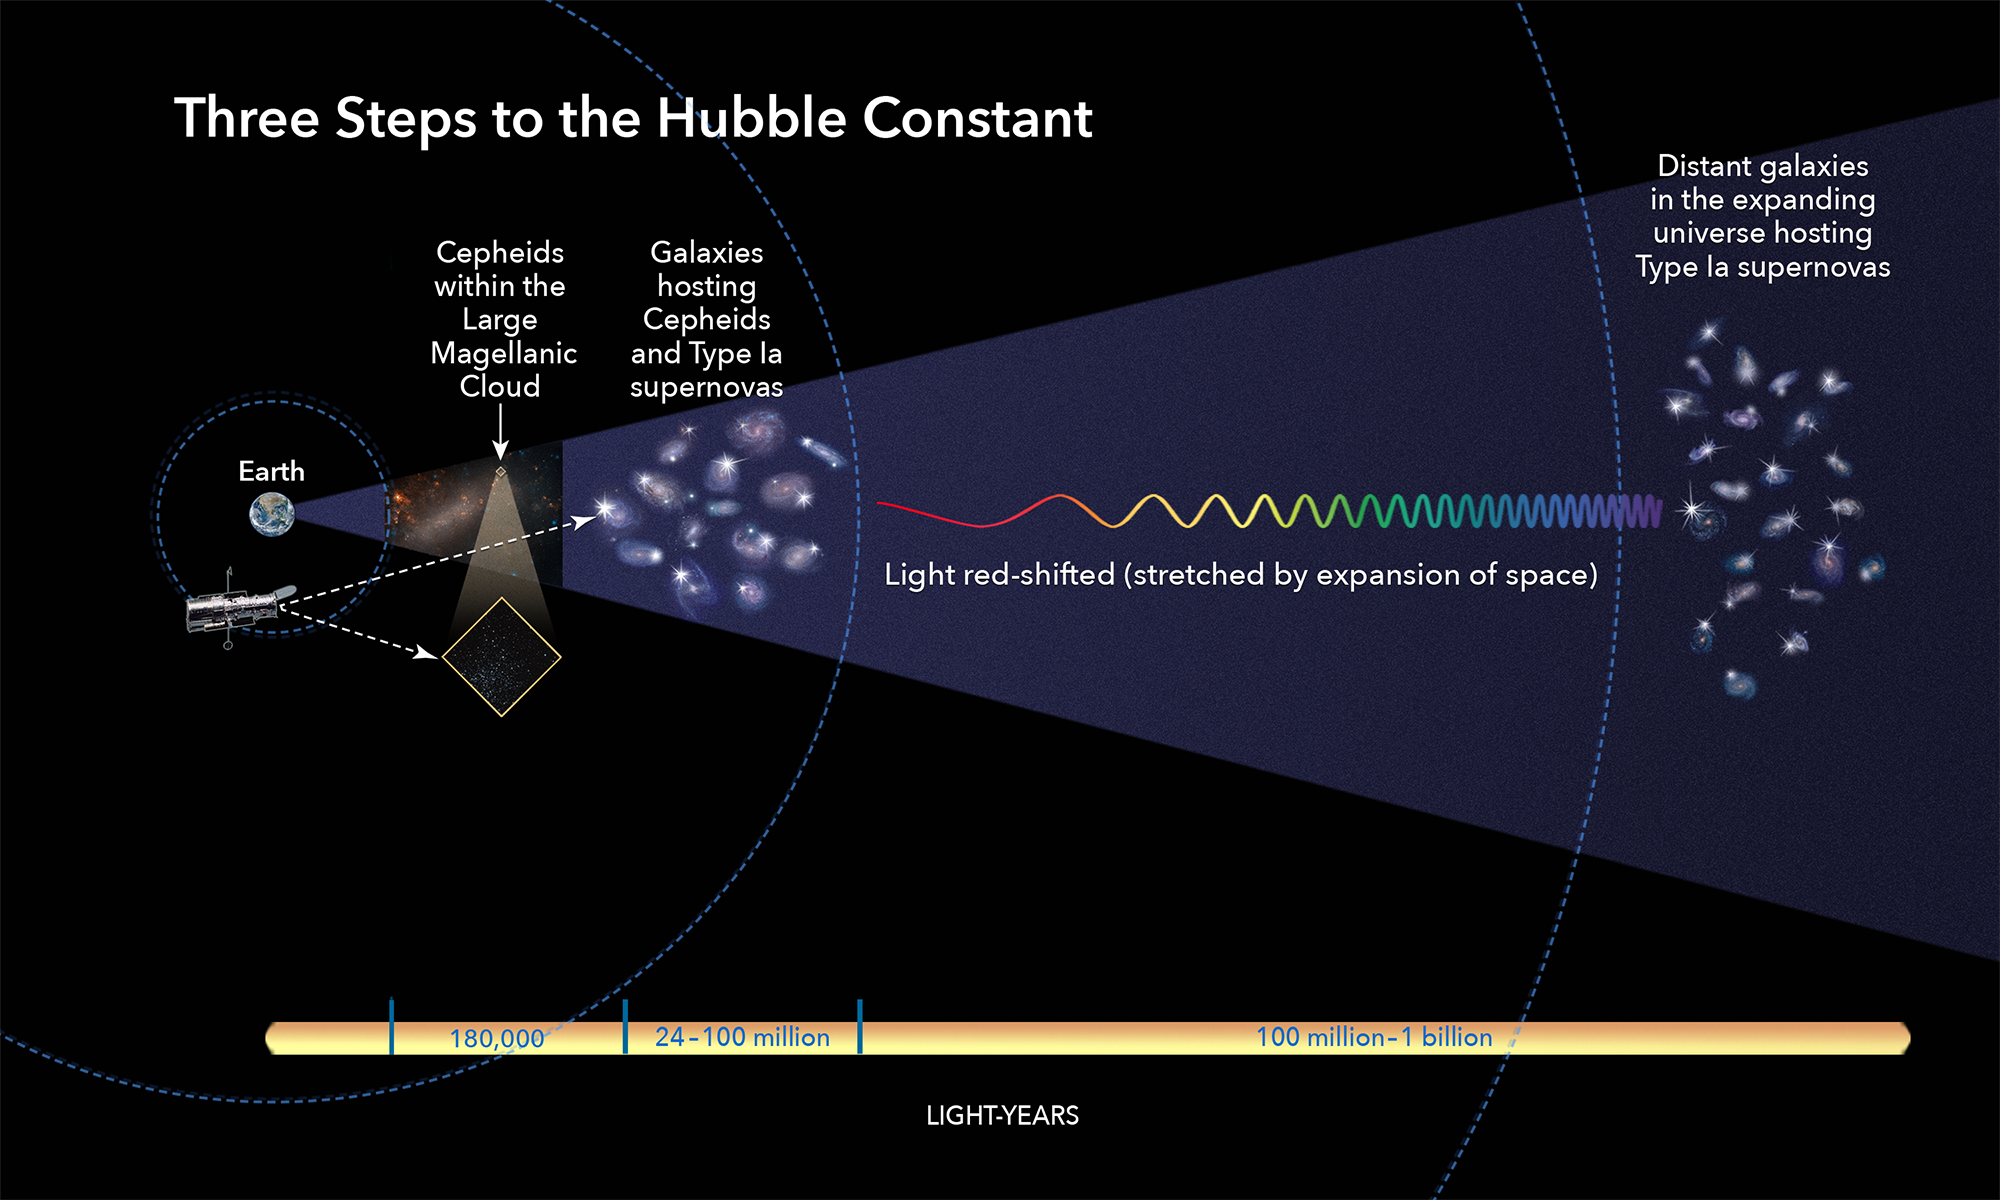 "A visualisation of the cosmic distance ladder to measure H0 from supernovae."